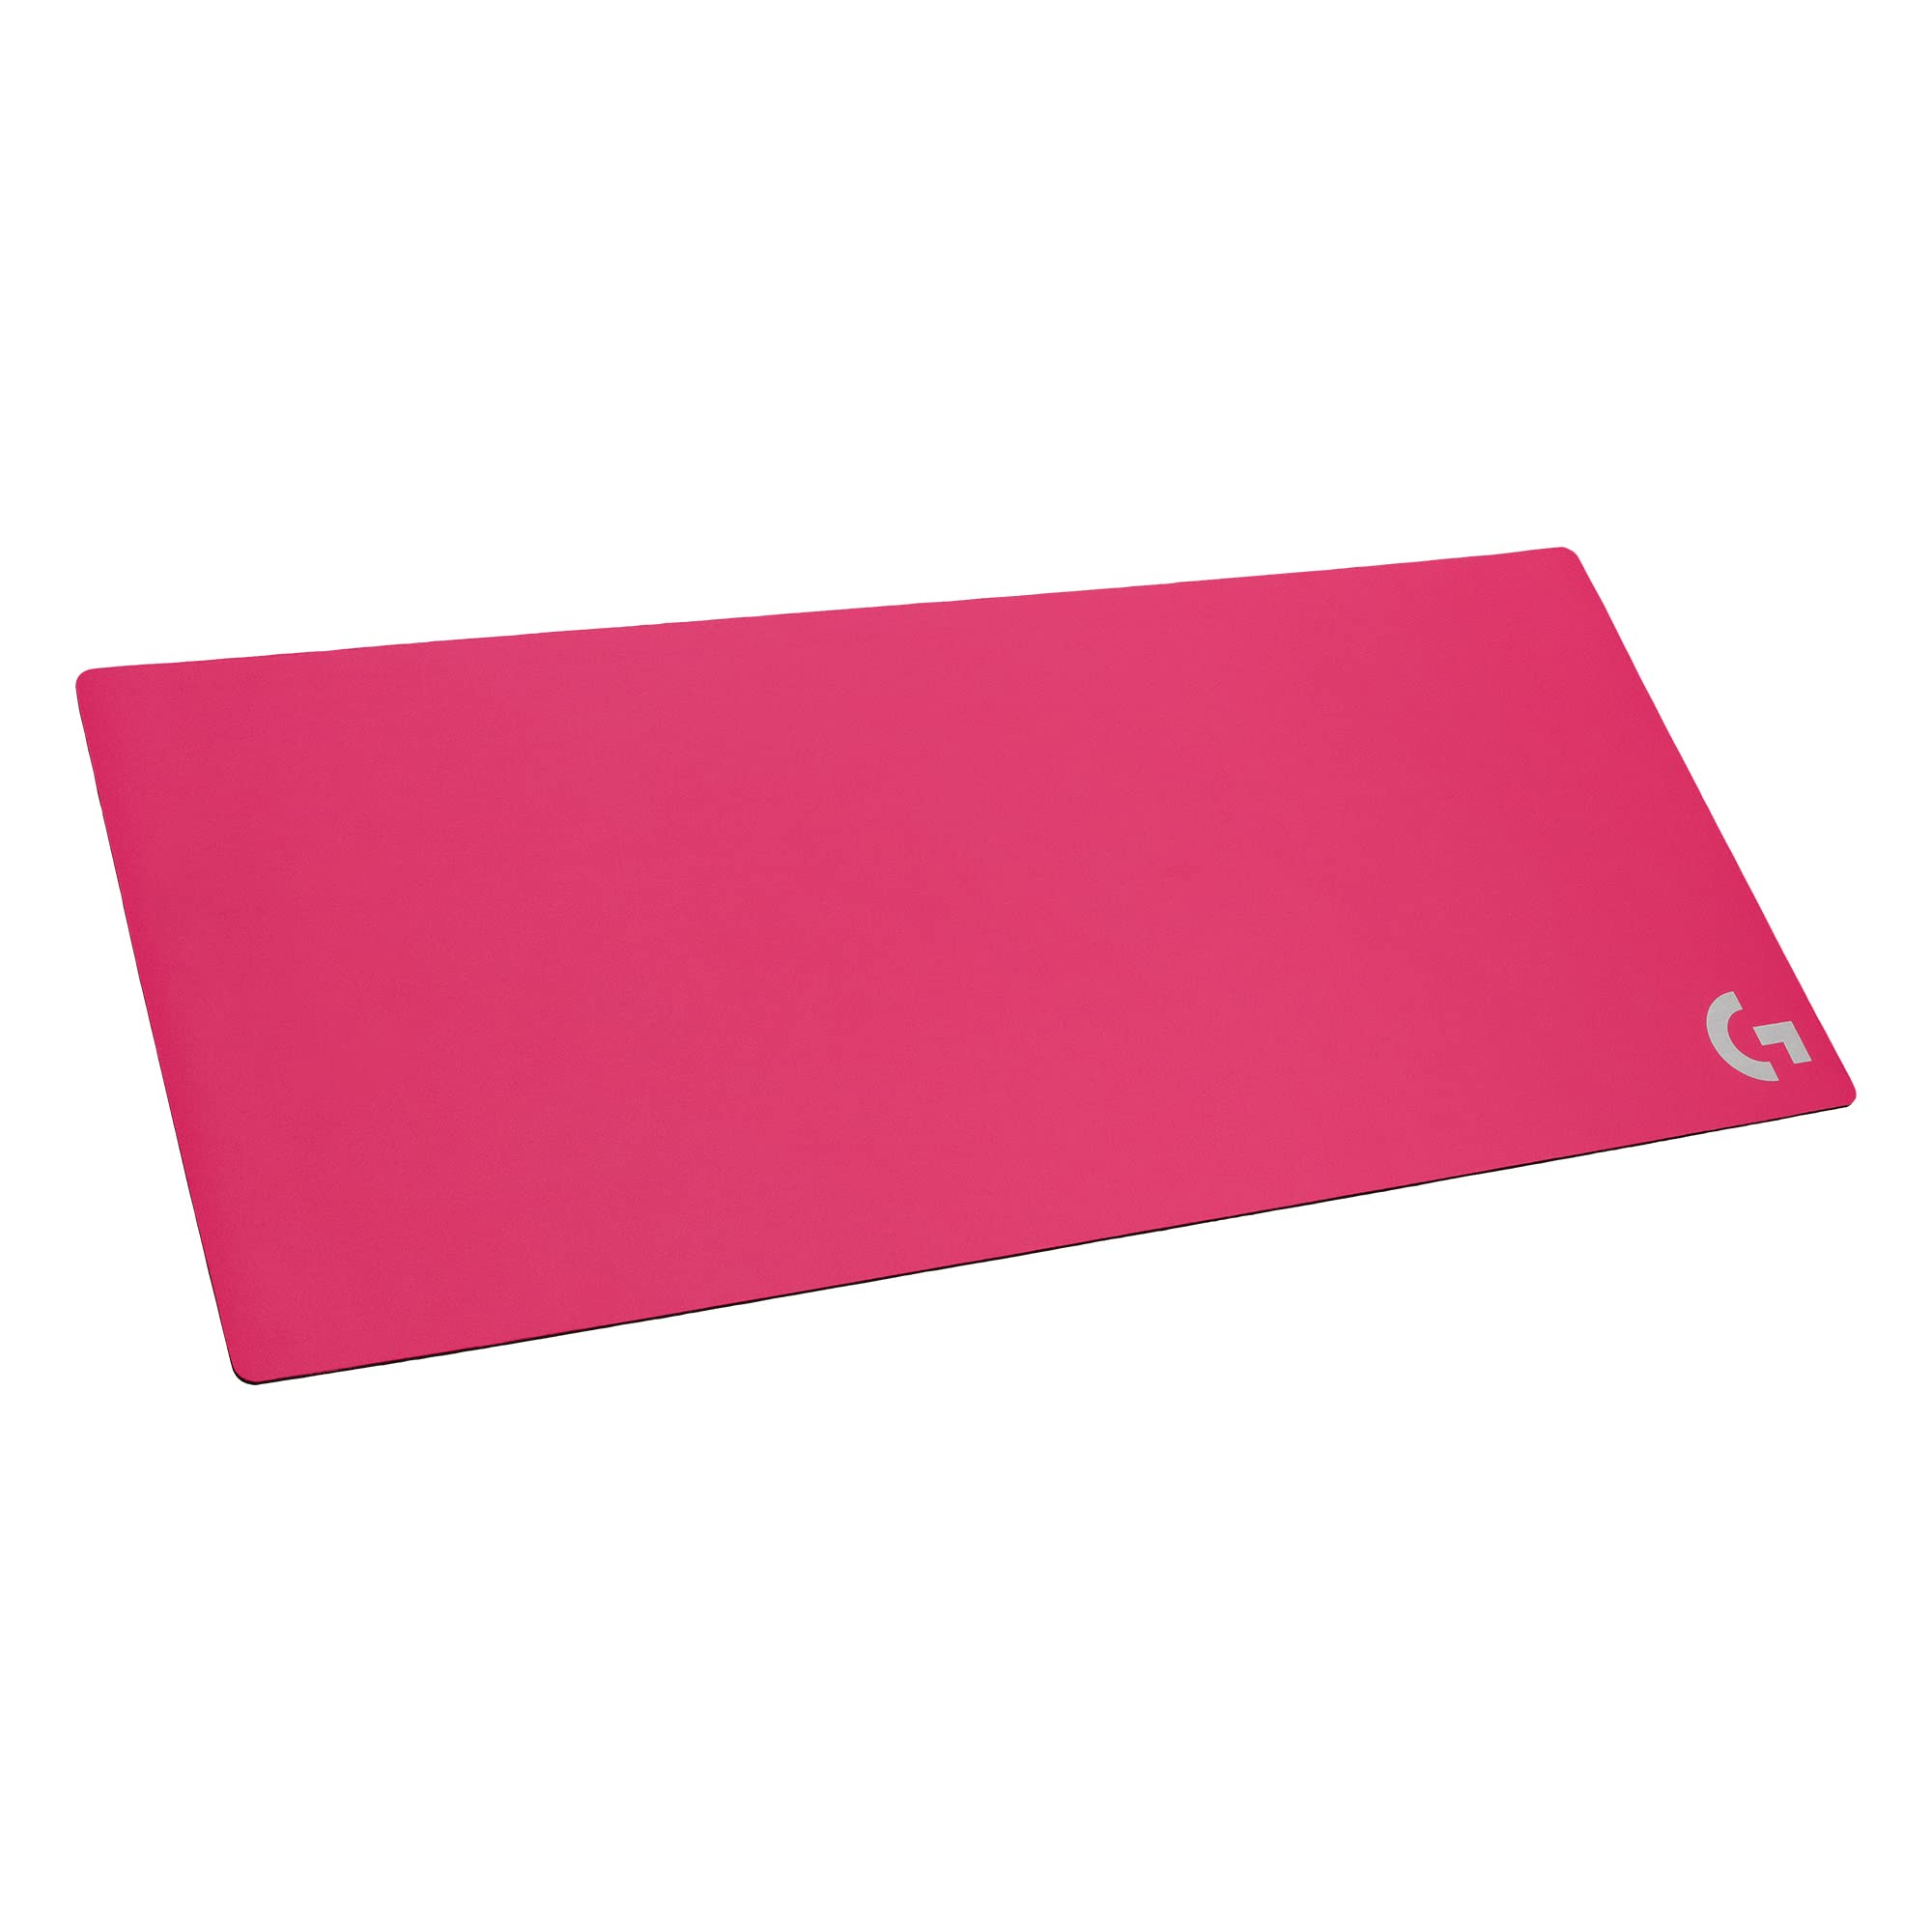 G840 XL GAMING MOUSE PAD